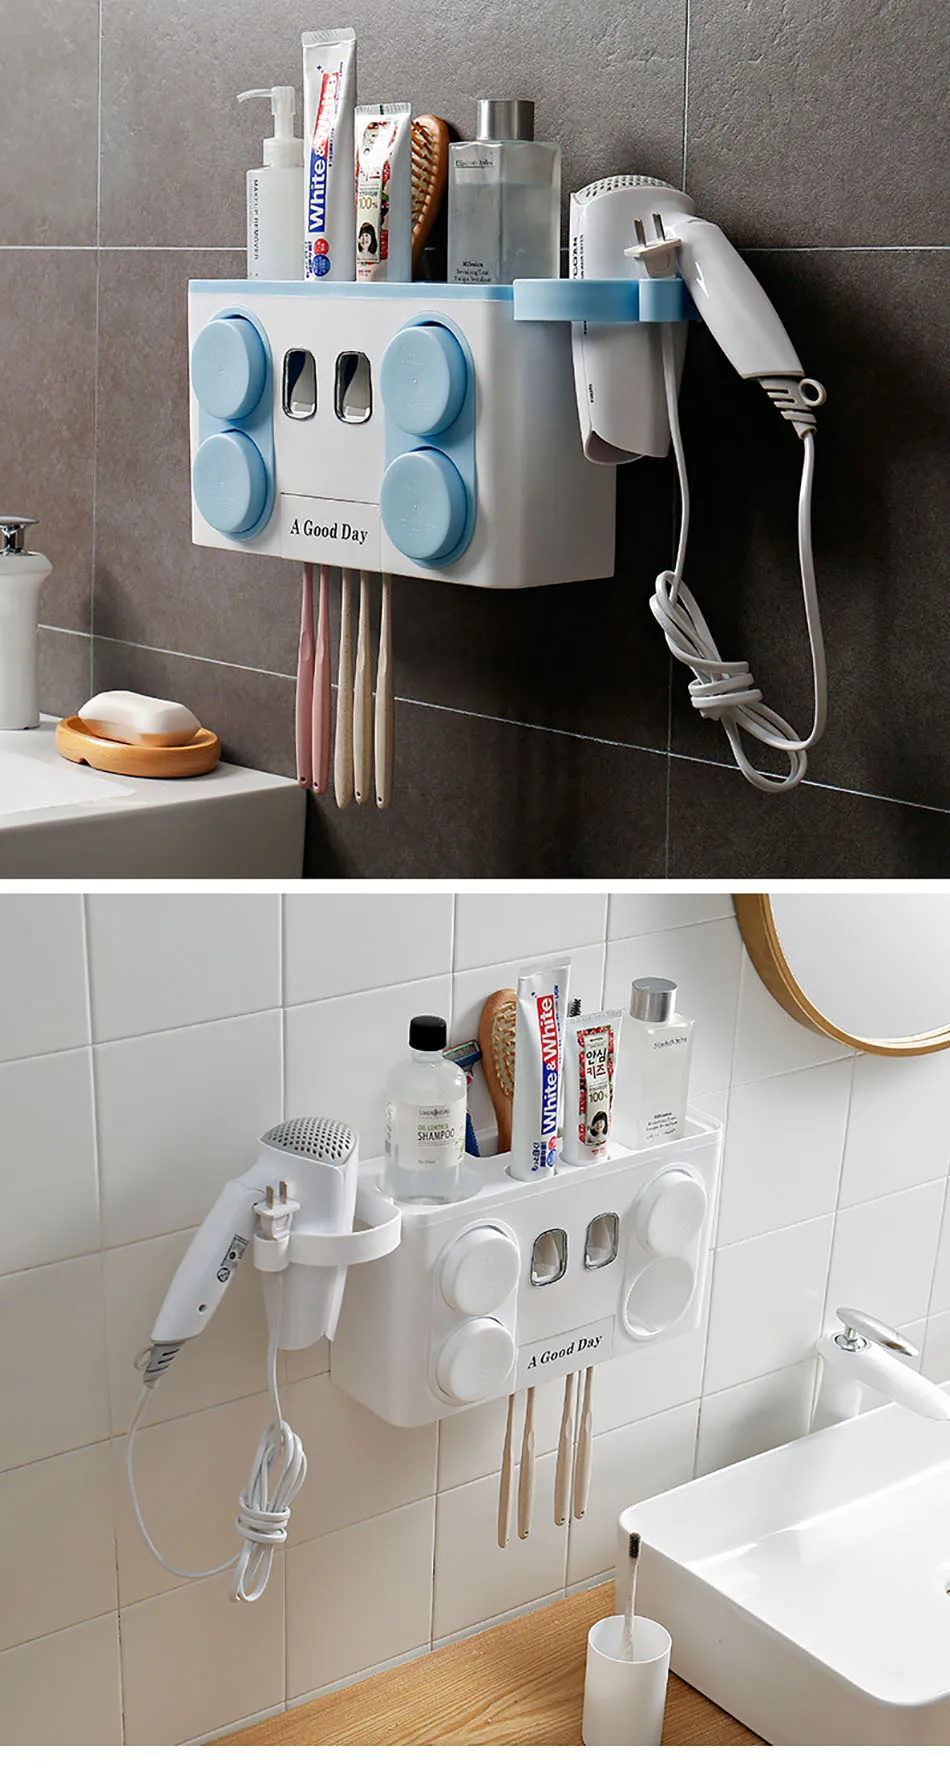 Wonderlife Bathroom Set Accessories Toothbrush Holder Automatic Toothpaste Dispenser Suction Cup Wall Mount Bathroom Storage Box